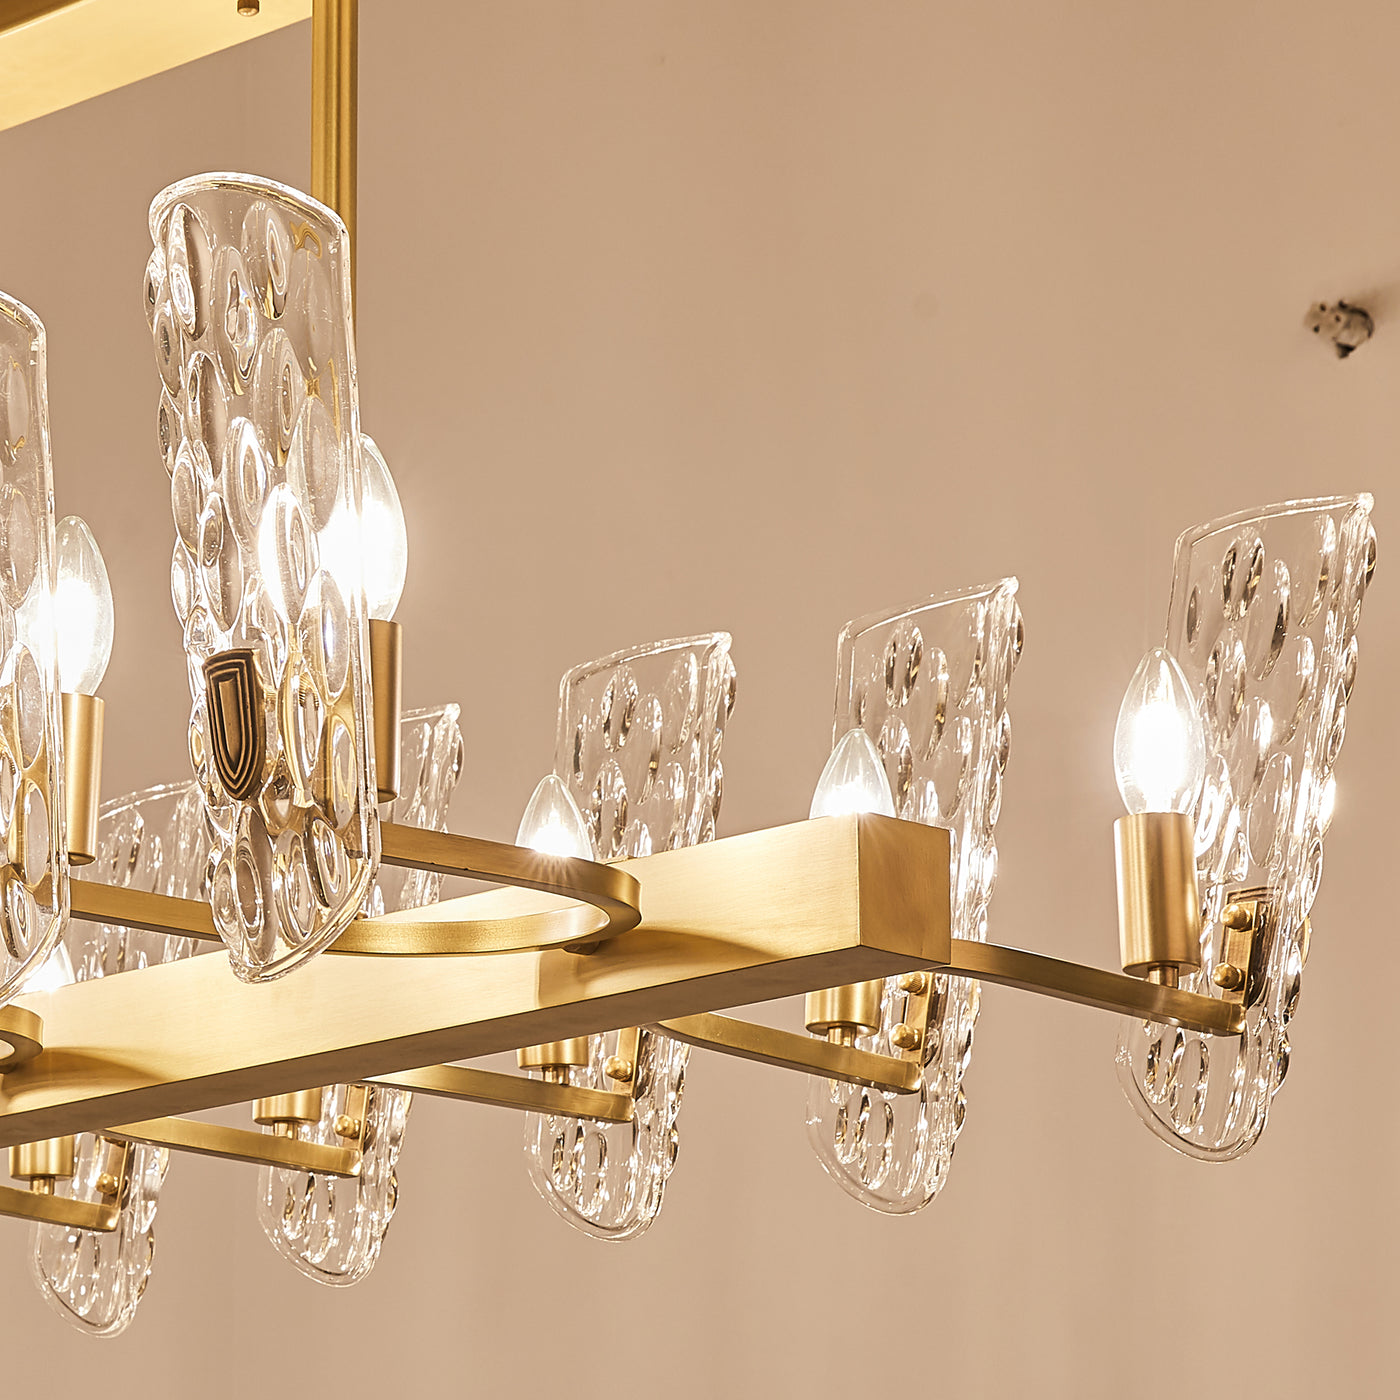 Water pattern glass rectangle gold chandelier